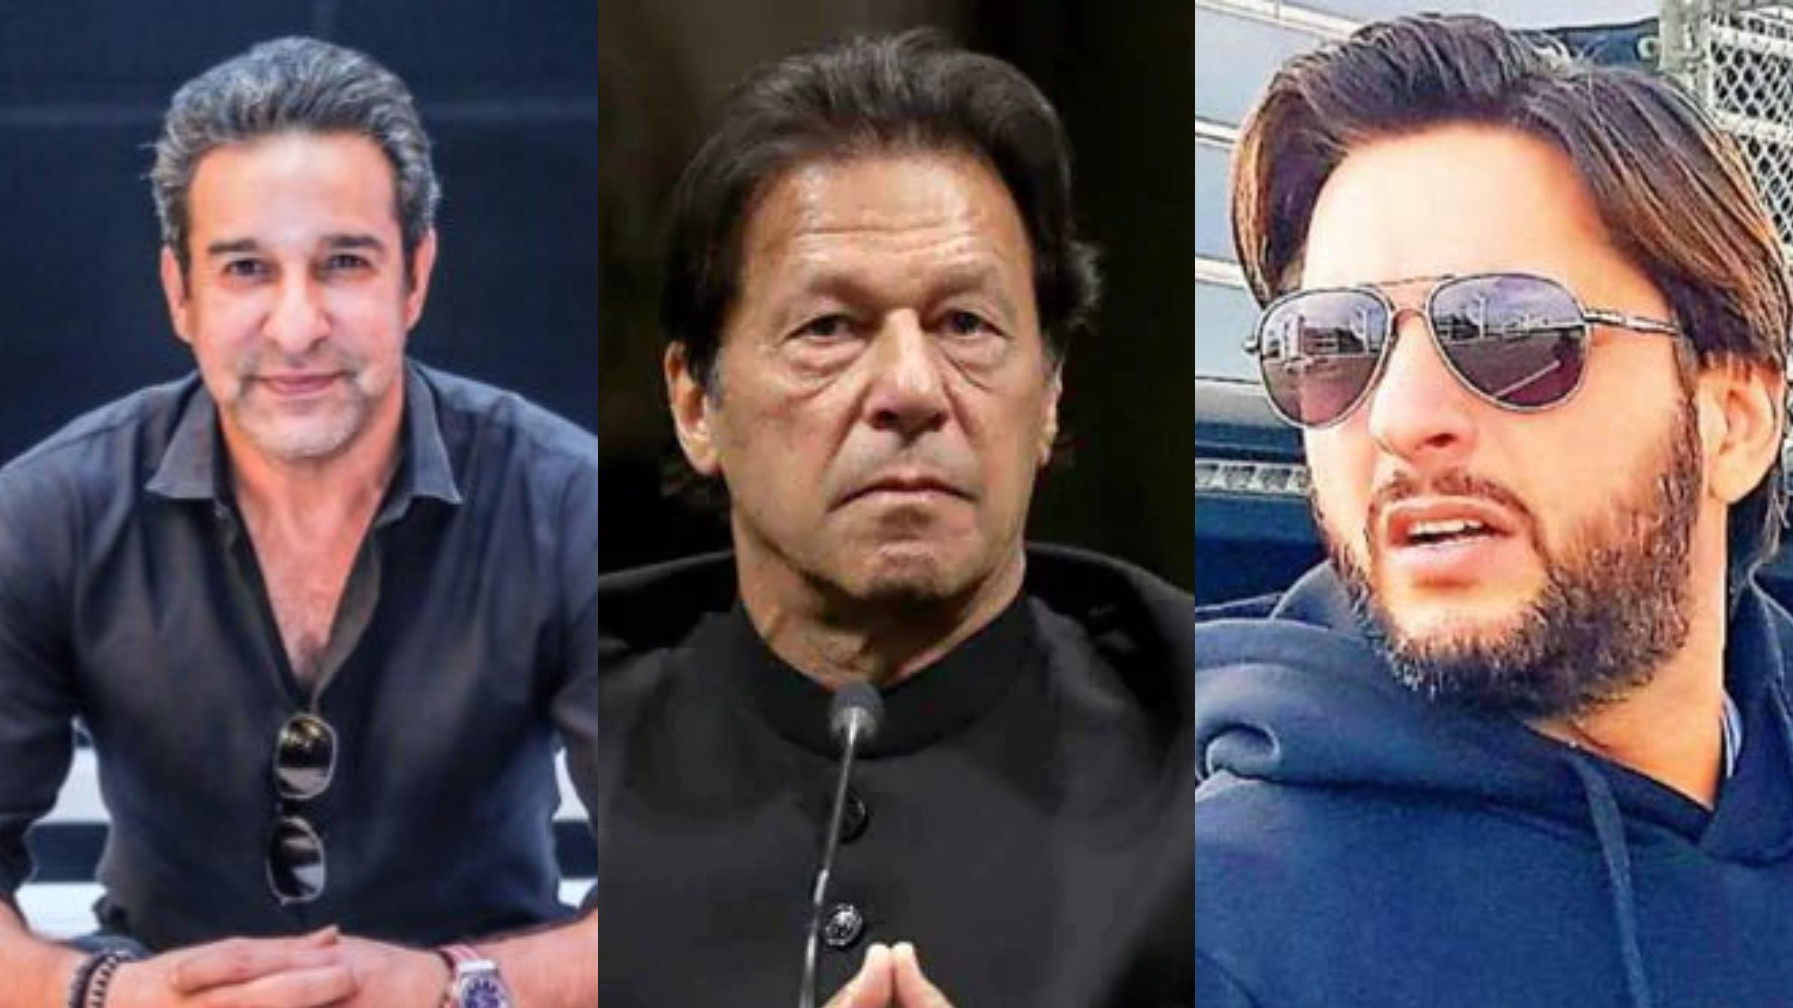 Pakistan cricket fraternity wishes speedy recovery to PM Imran Khan after he tests positive for COVID-19